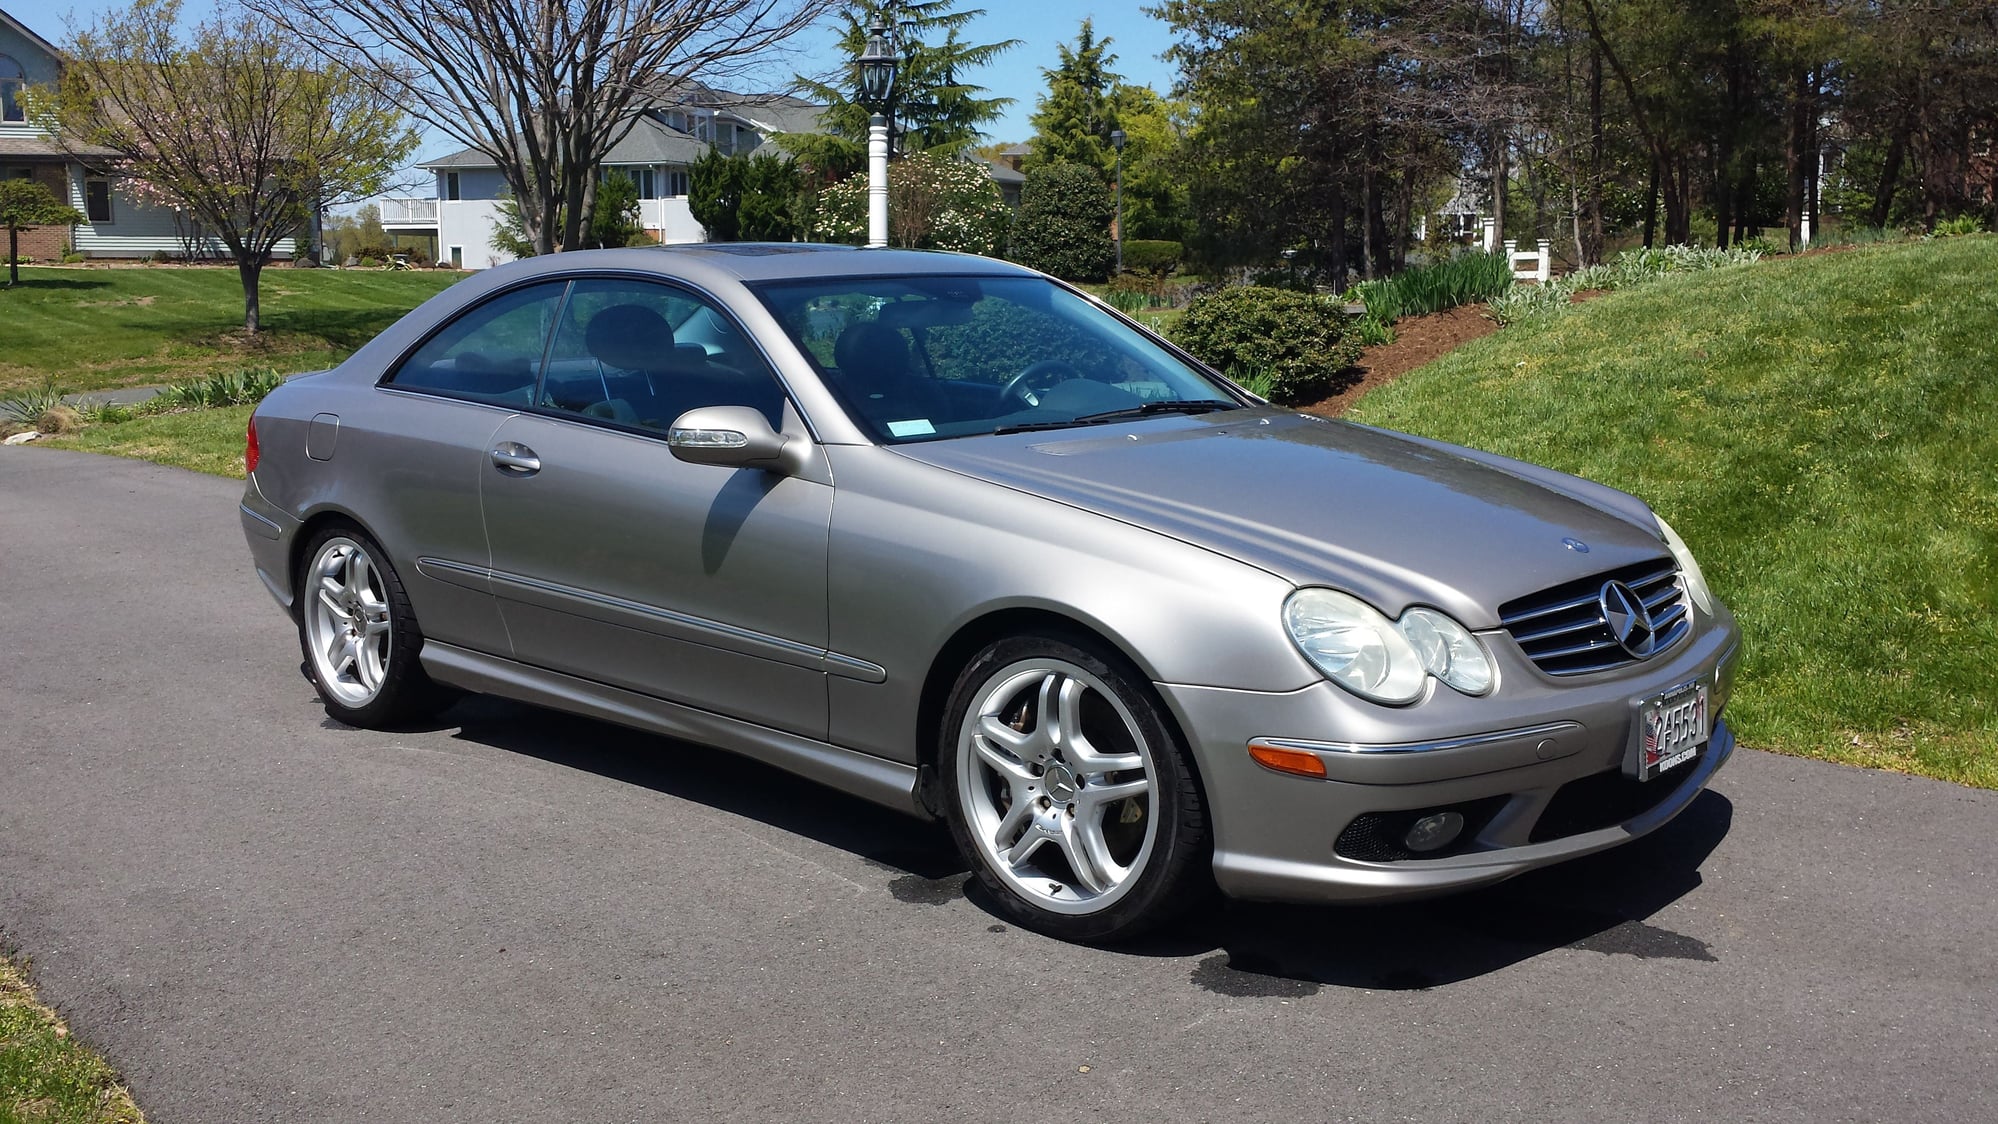 2005 Mercedes-Benz CL55 AMG - FS: 2005 CLK55 AMG - Used - VIN WDBTJ76HX5F135571 - 8 cyl - 2WD - Automatic - Coupe - Gray - Annapolis, MD 21403, United States